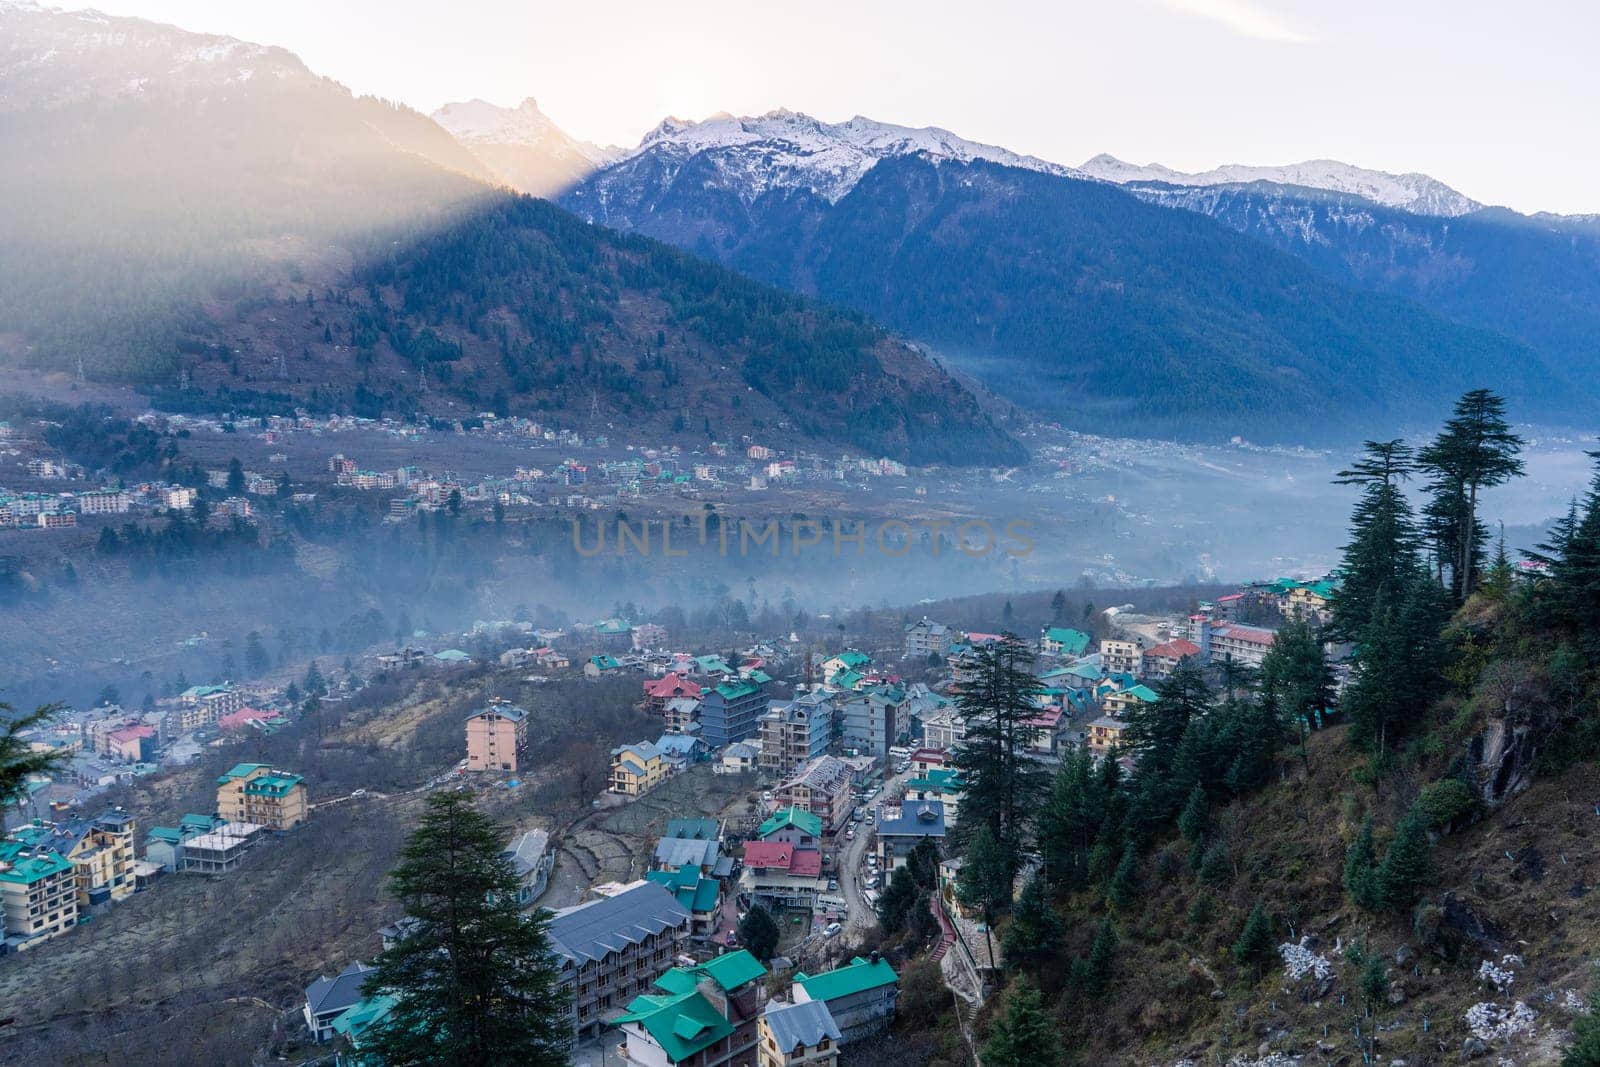 monsoon clouds moving over snow covered himalaya mountains with the blue orange sunset sunrise light with town of kullu manali valley at the base of mountains India